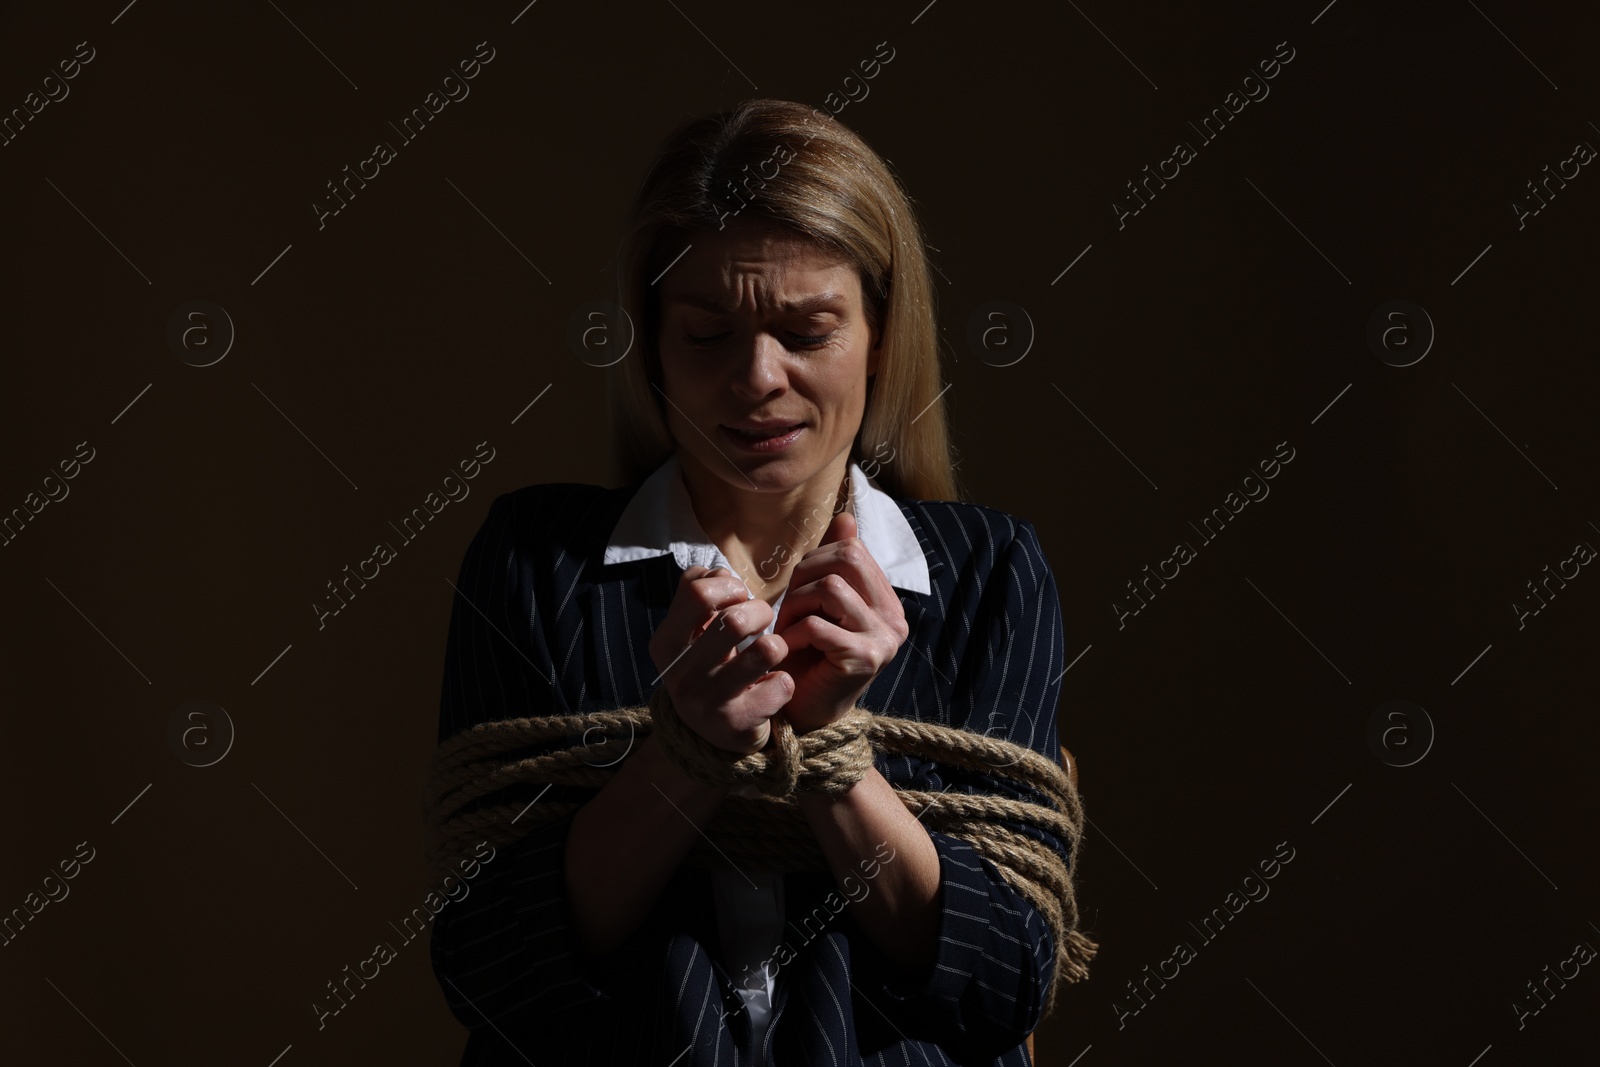 Photo of Woman tied up and taken hostage on dark background